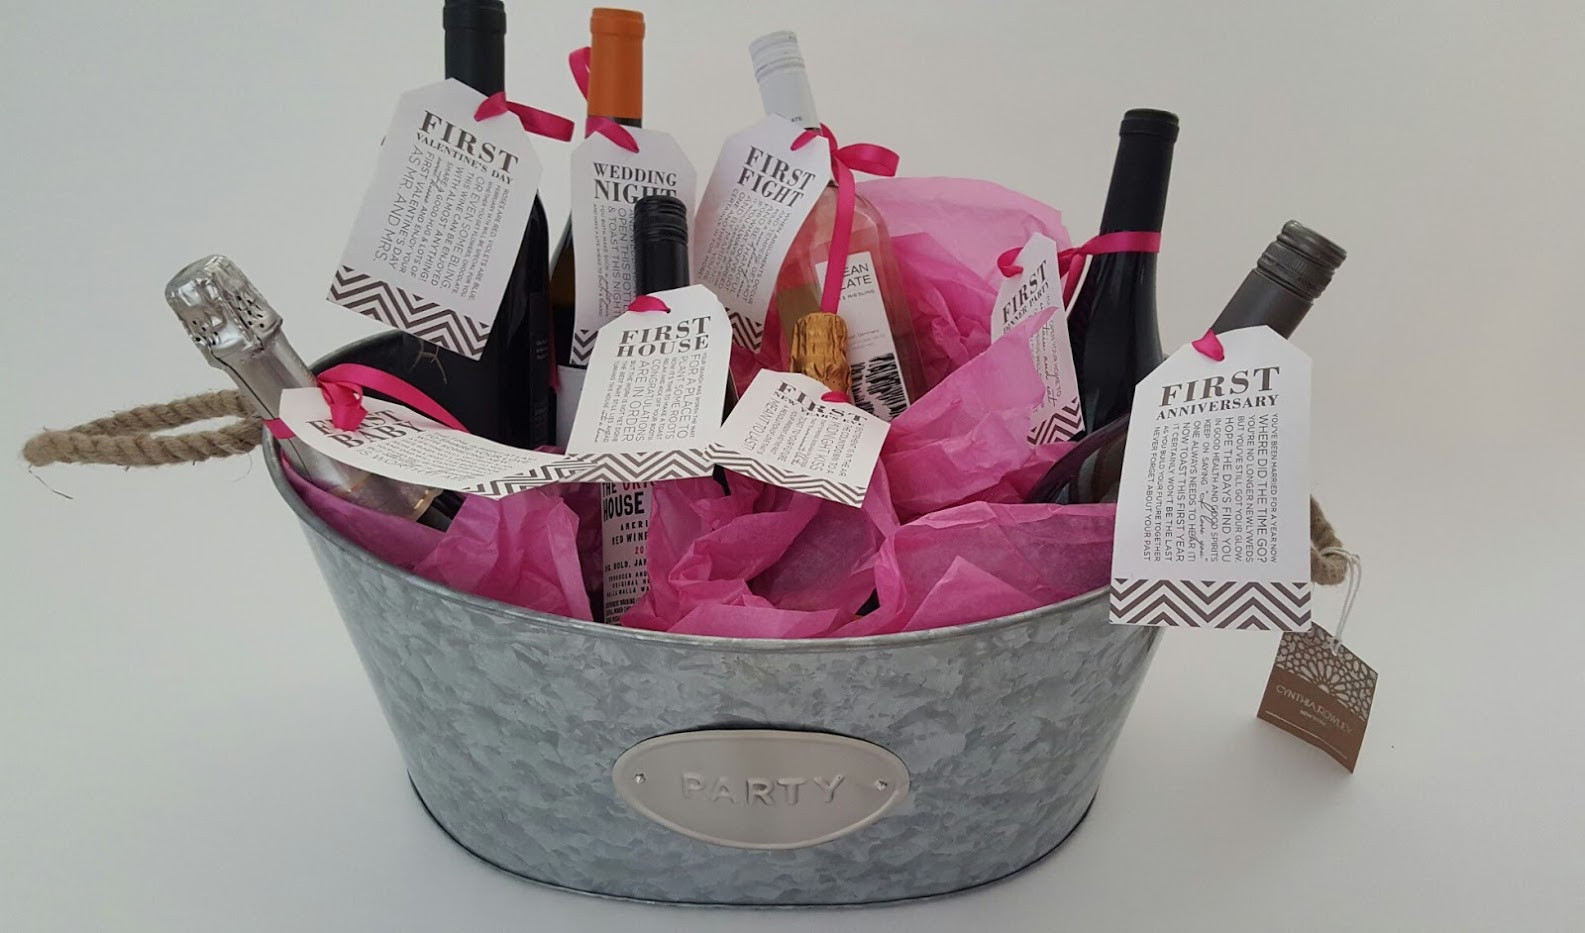 Gift Basket Ideas For Bridal Shower
 Bridal Shower Gift DIY to Try A Basket of “Firsts” for